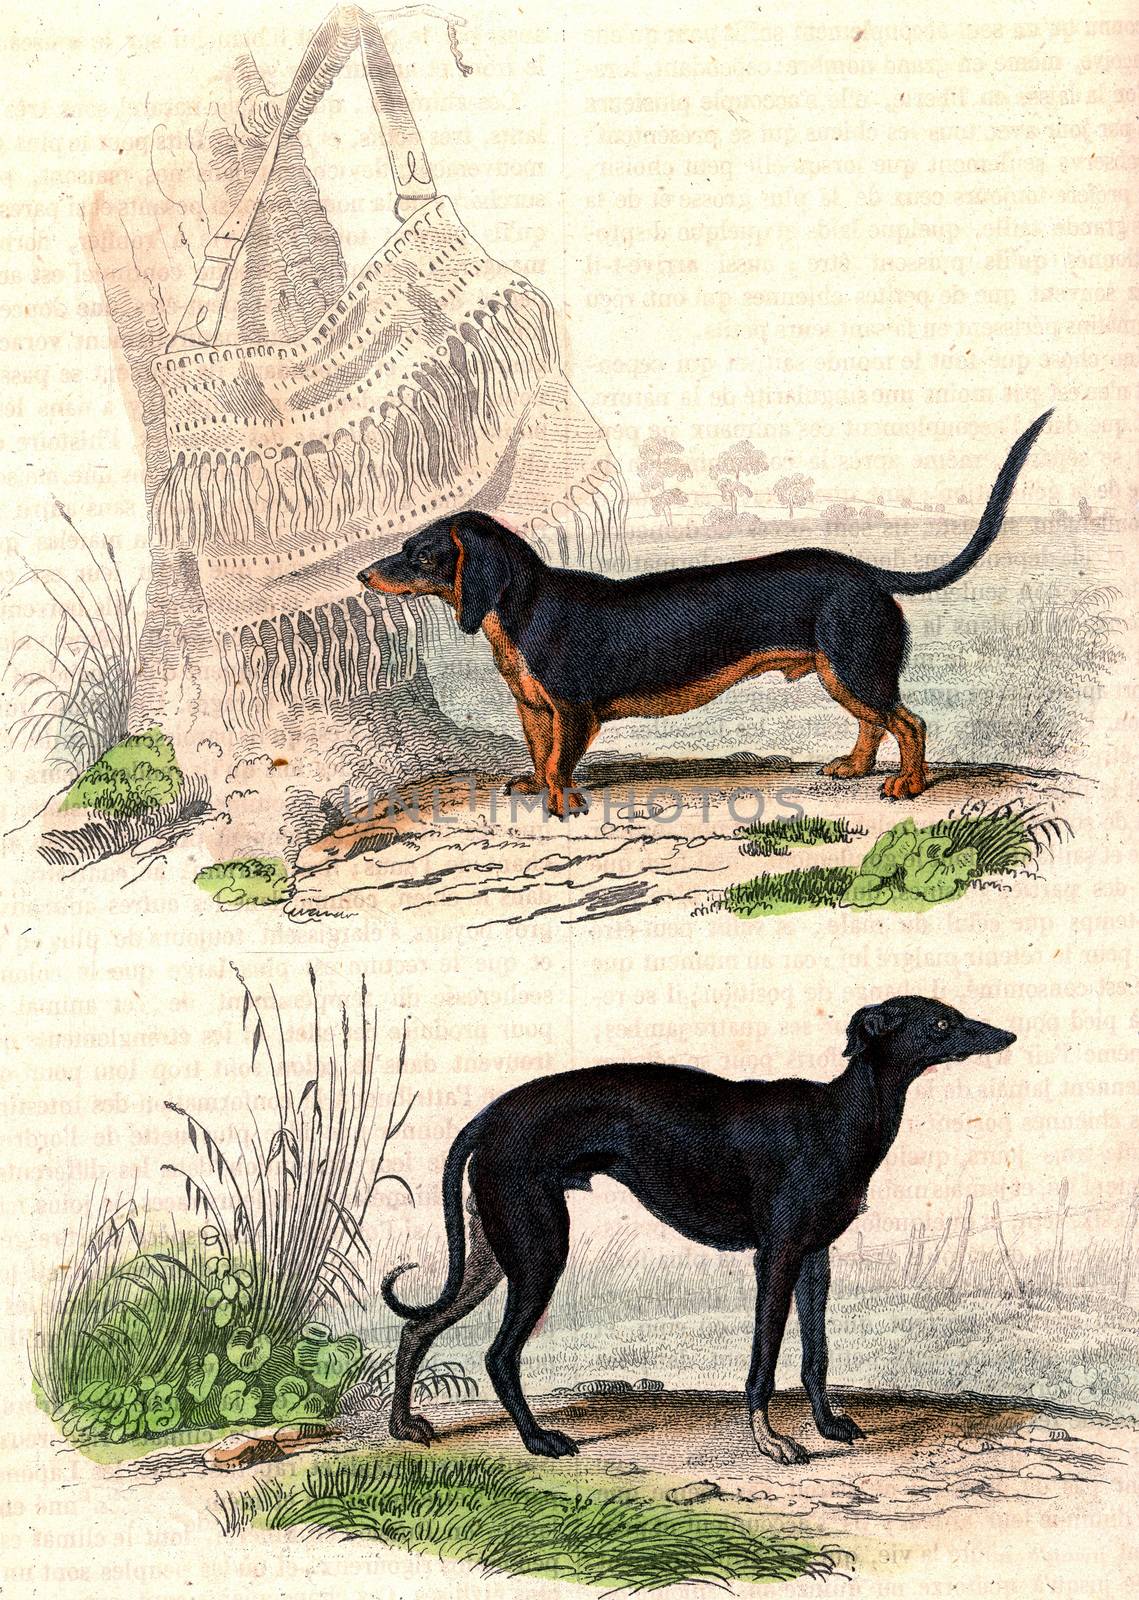 Basset with torso legs, The Greyhound, vintage engraved illustration. From Buffon Complete Work.
